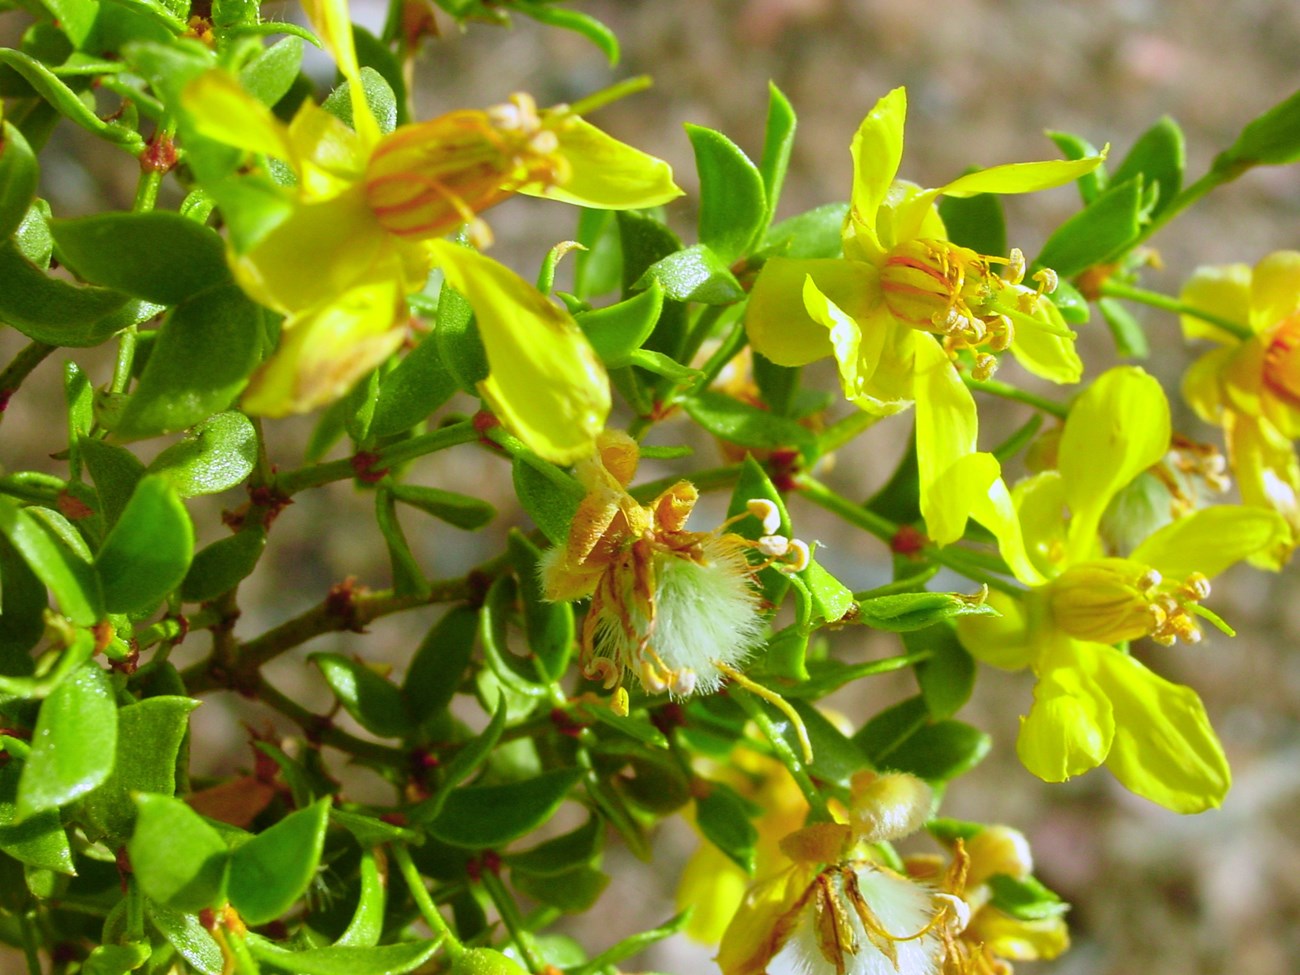 The soft yellow blossoms of the creosotebush giving way to fluffy seed heads.